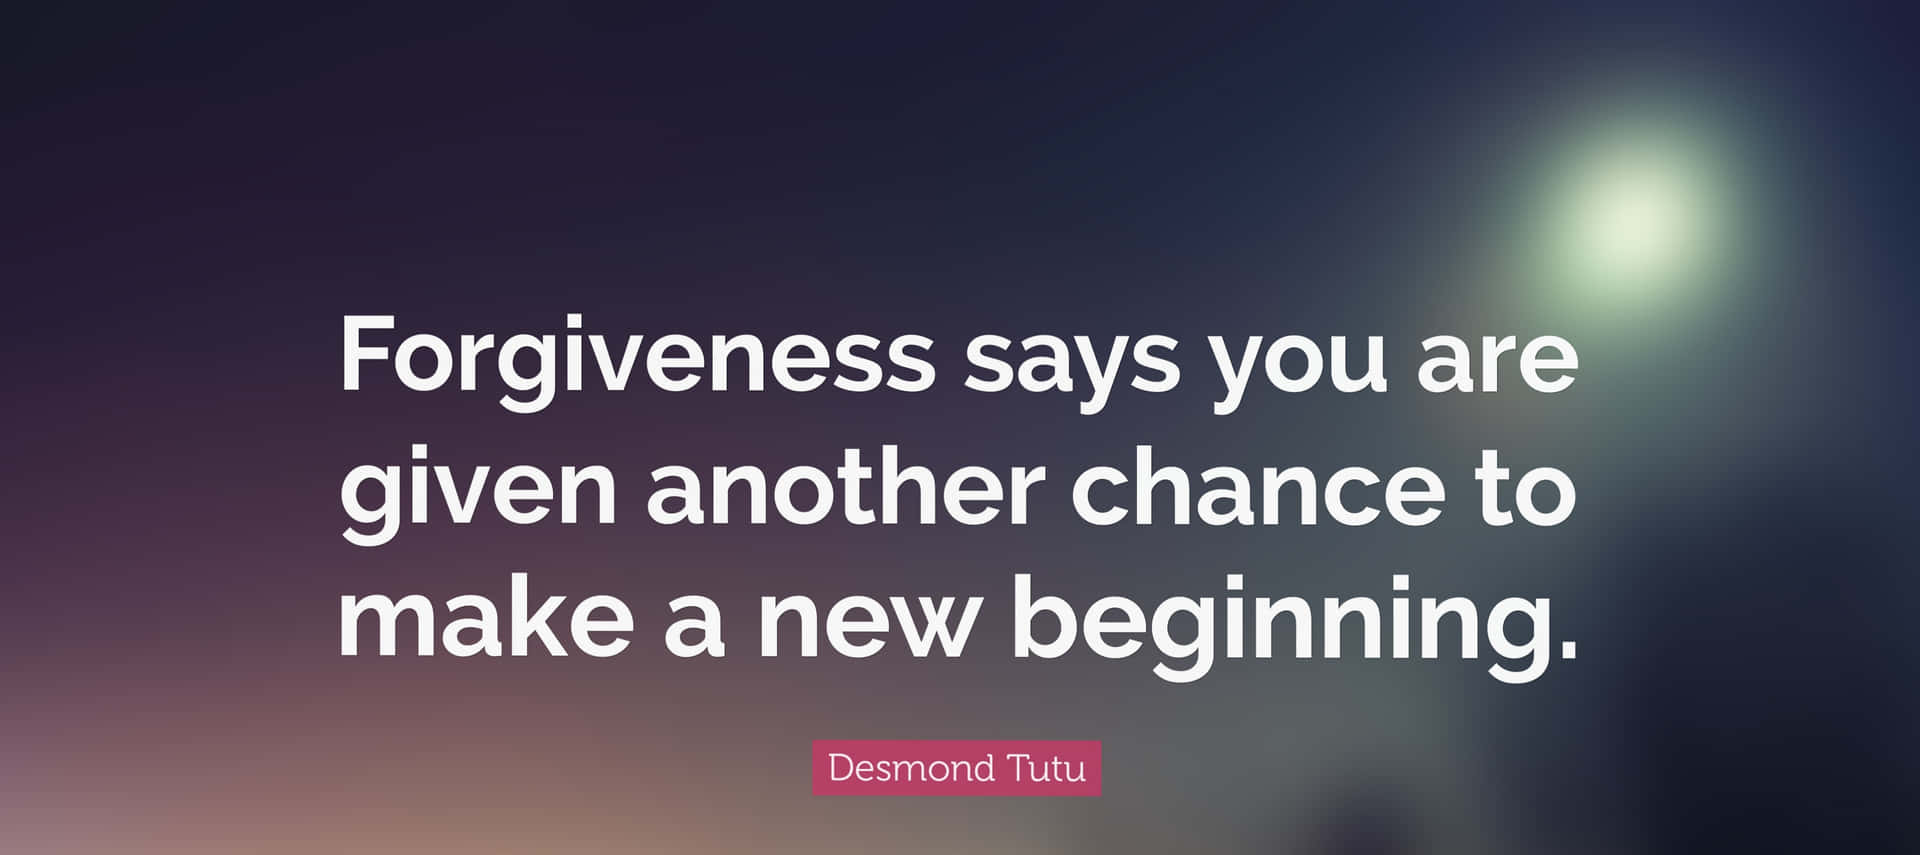 Forgiveness Says You Are Given Another Chance To Make A New Beginning